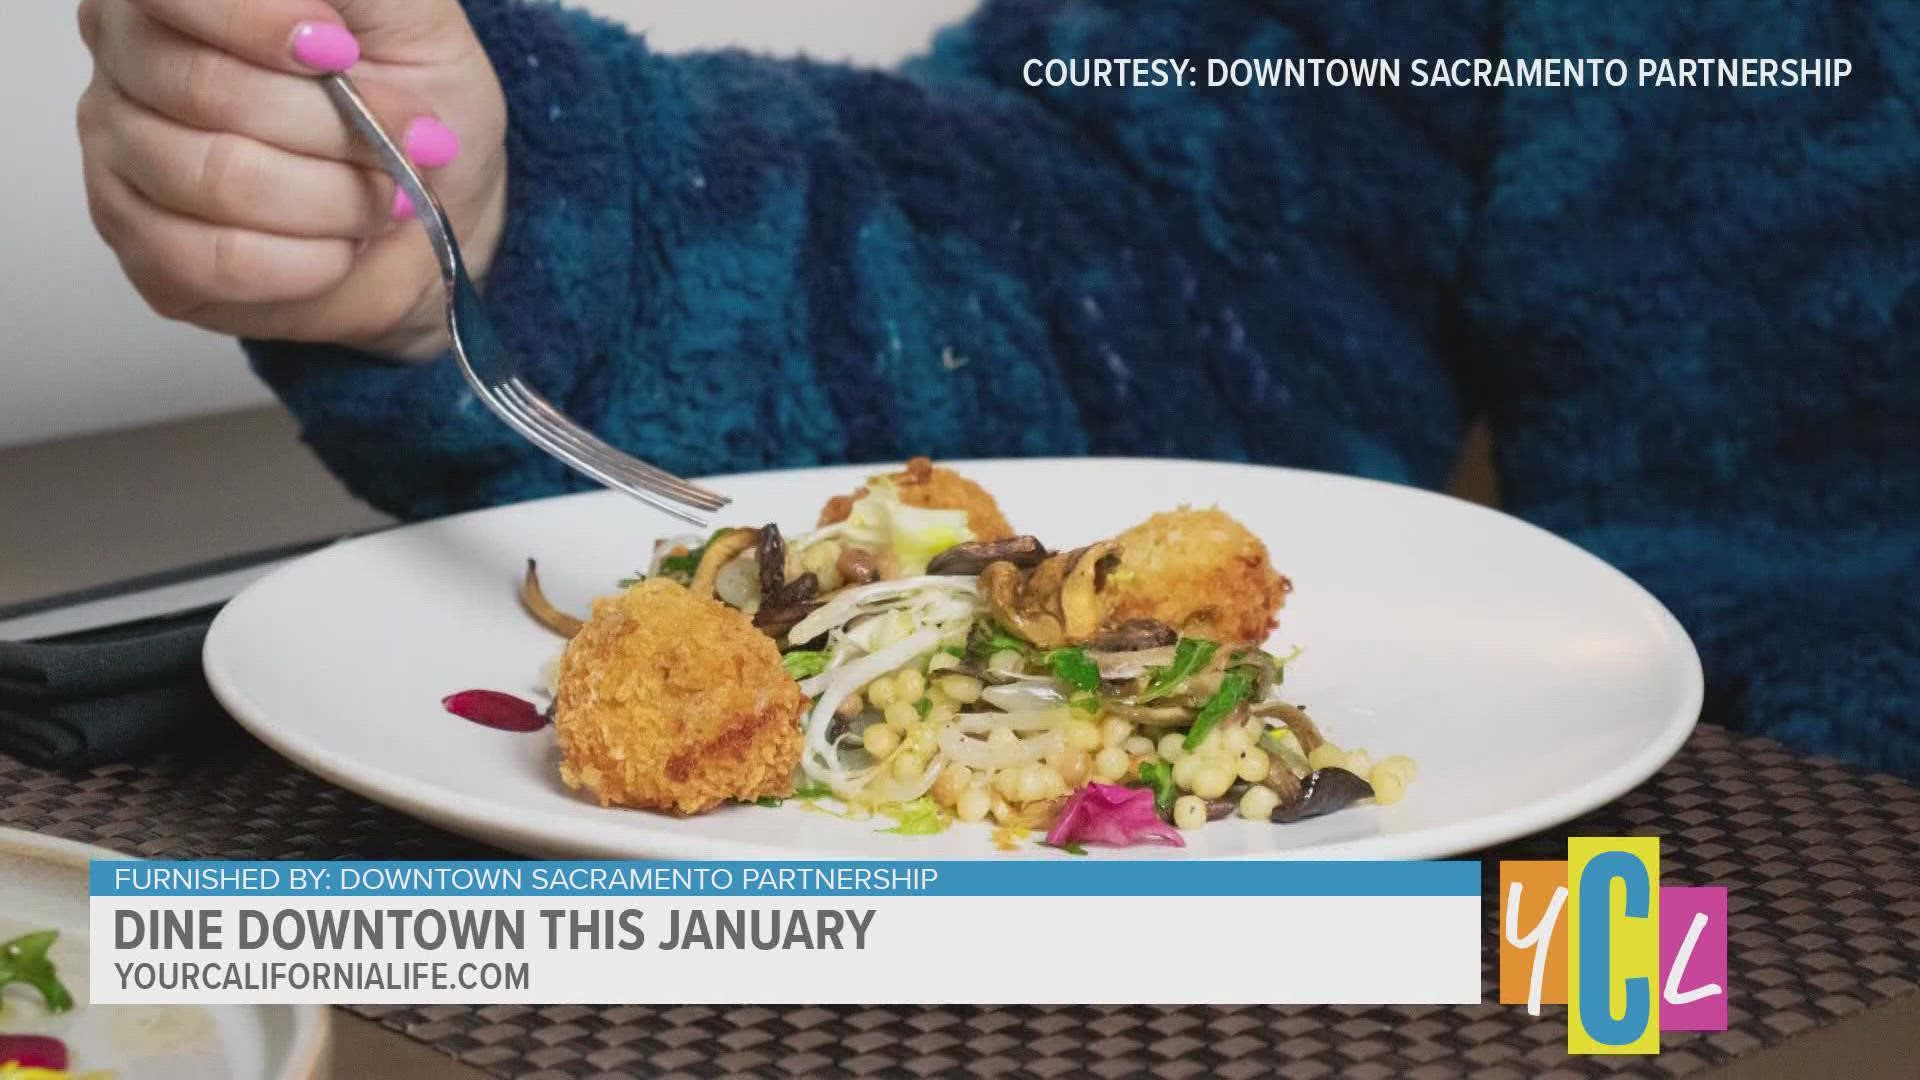 Sacramento’s exclusive dining experience ‘Dine Downtown’ returns with new restaurants. Magpie Cafe told us what attendees can enjoy from their special menu.